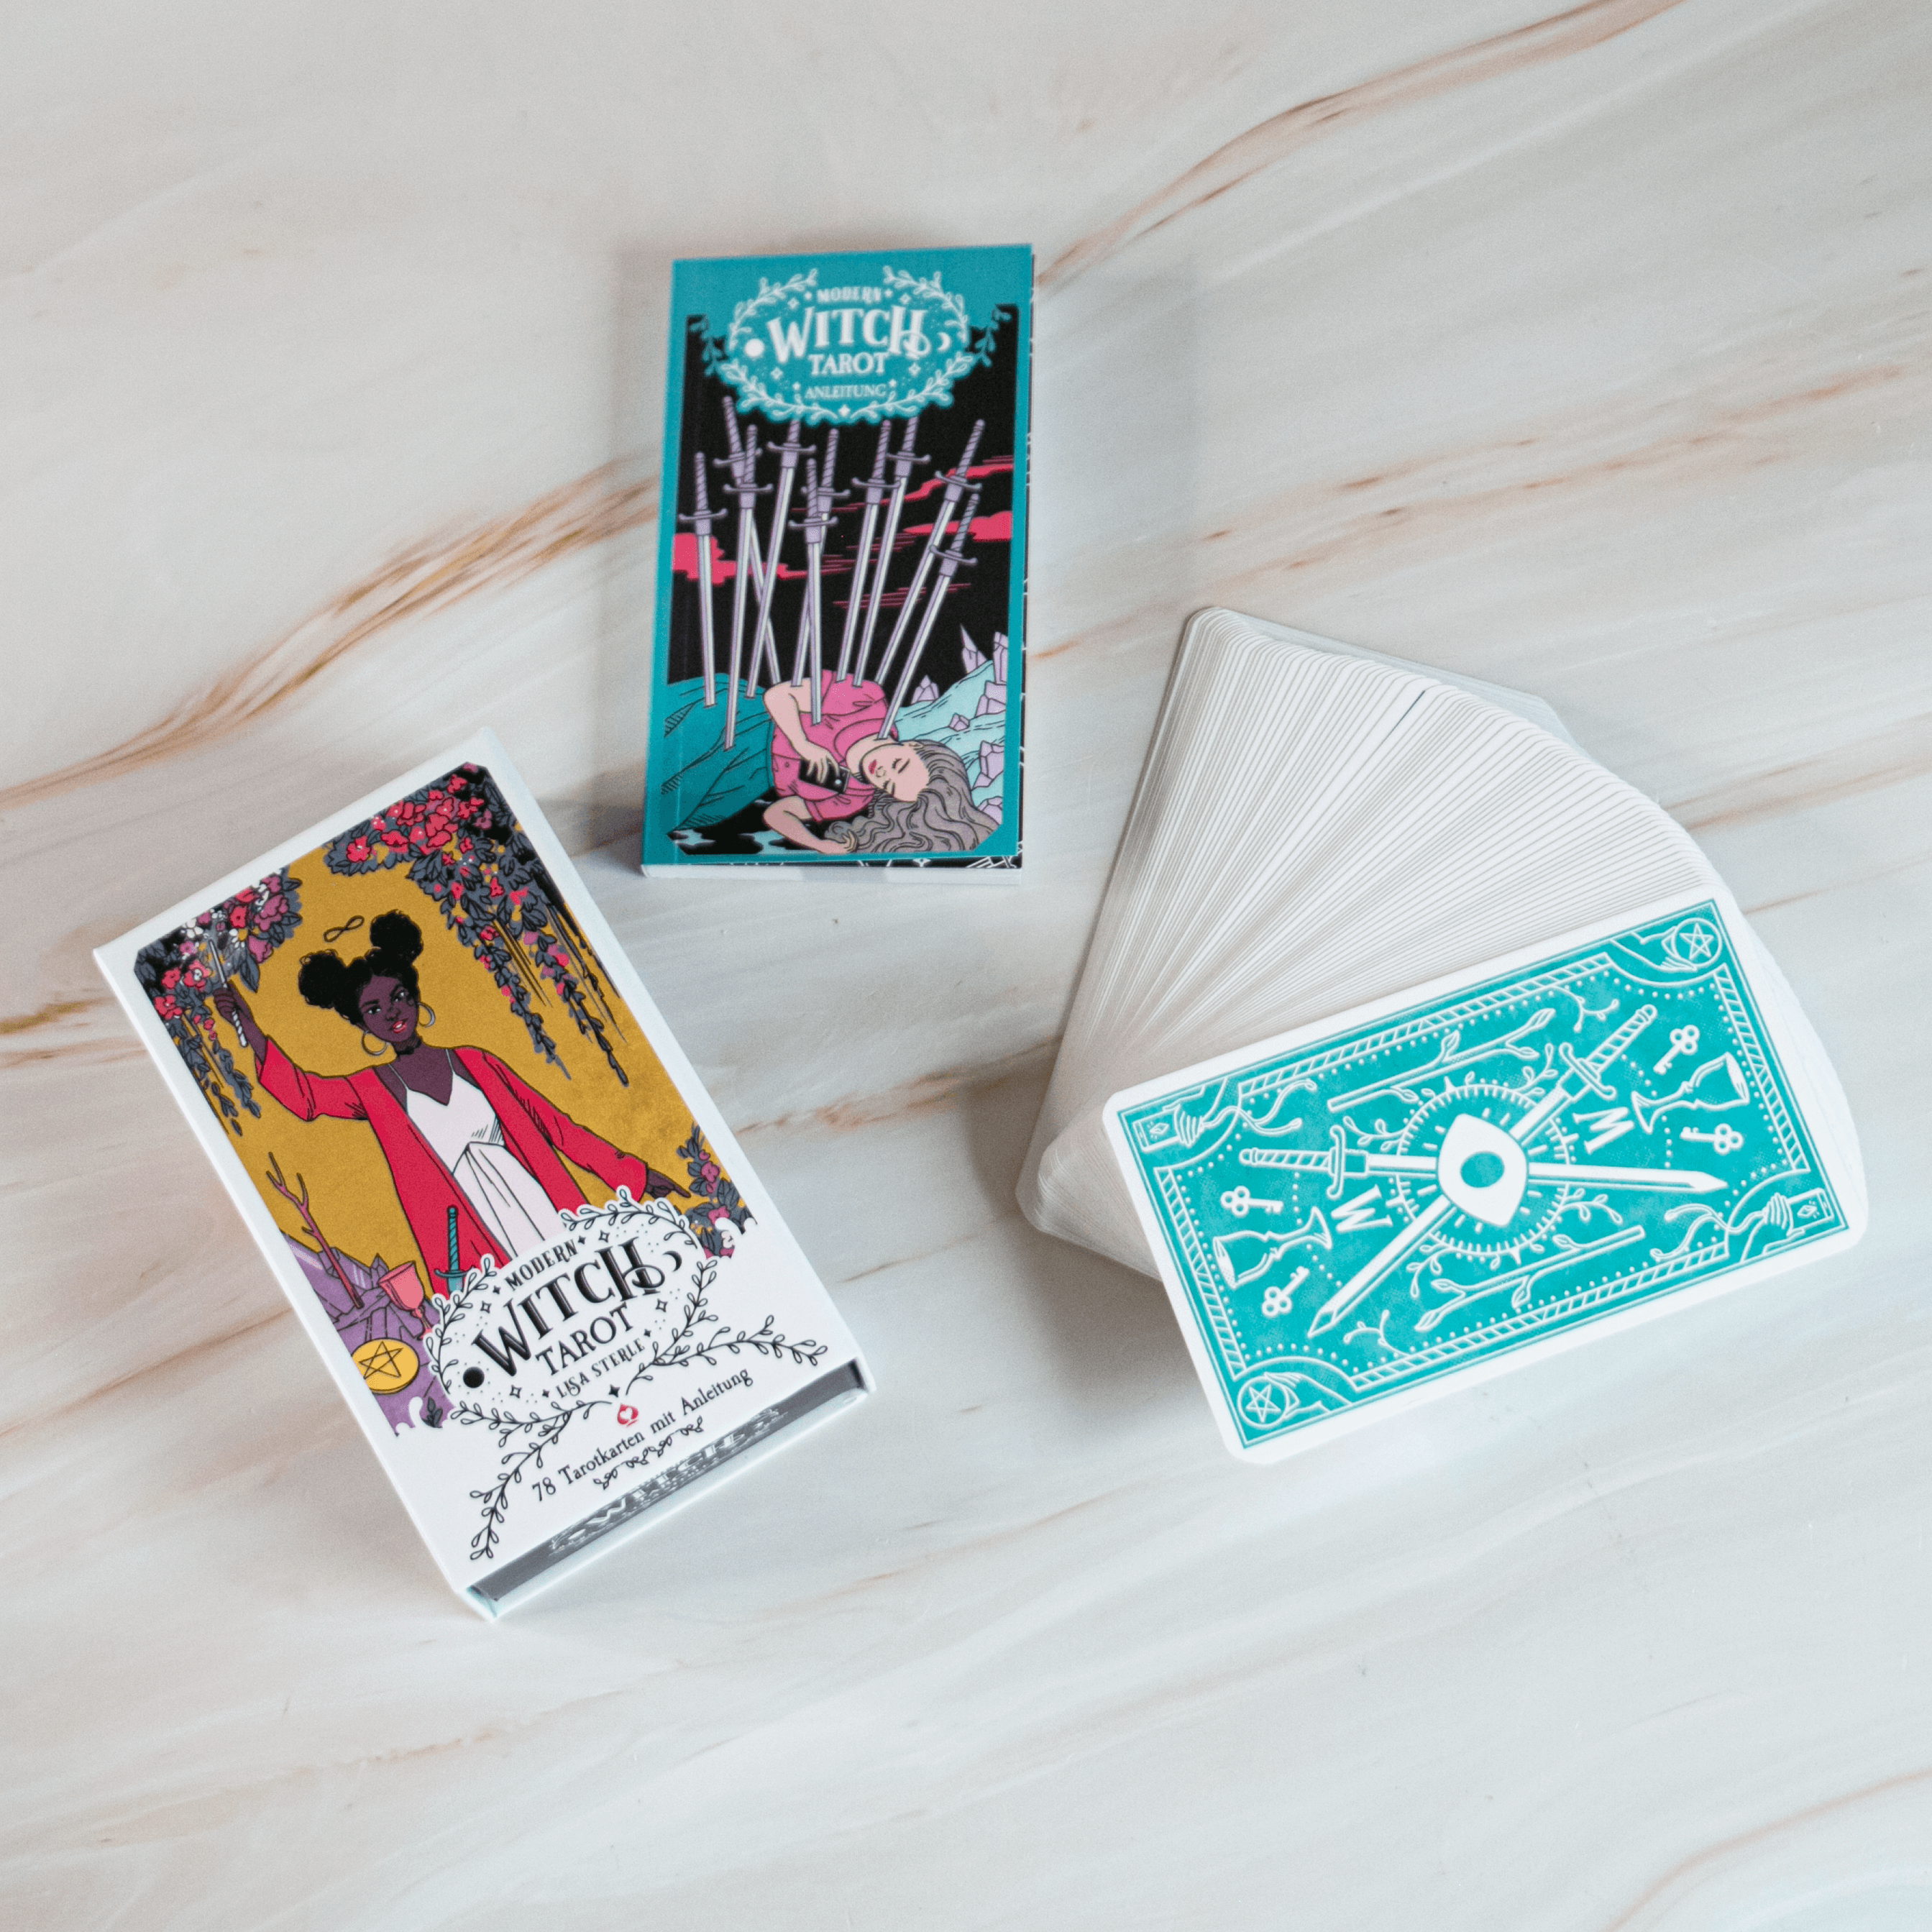 Modern Witch Tarot Lisa Sterle review box